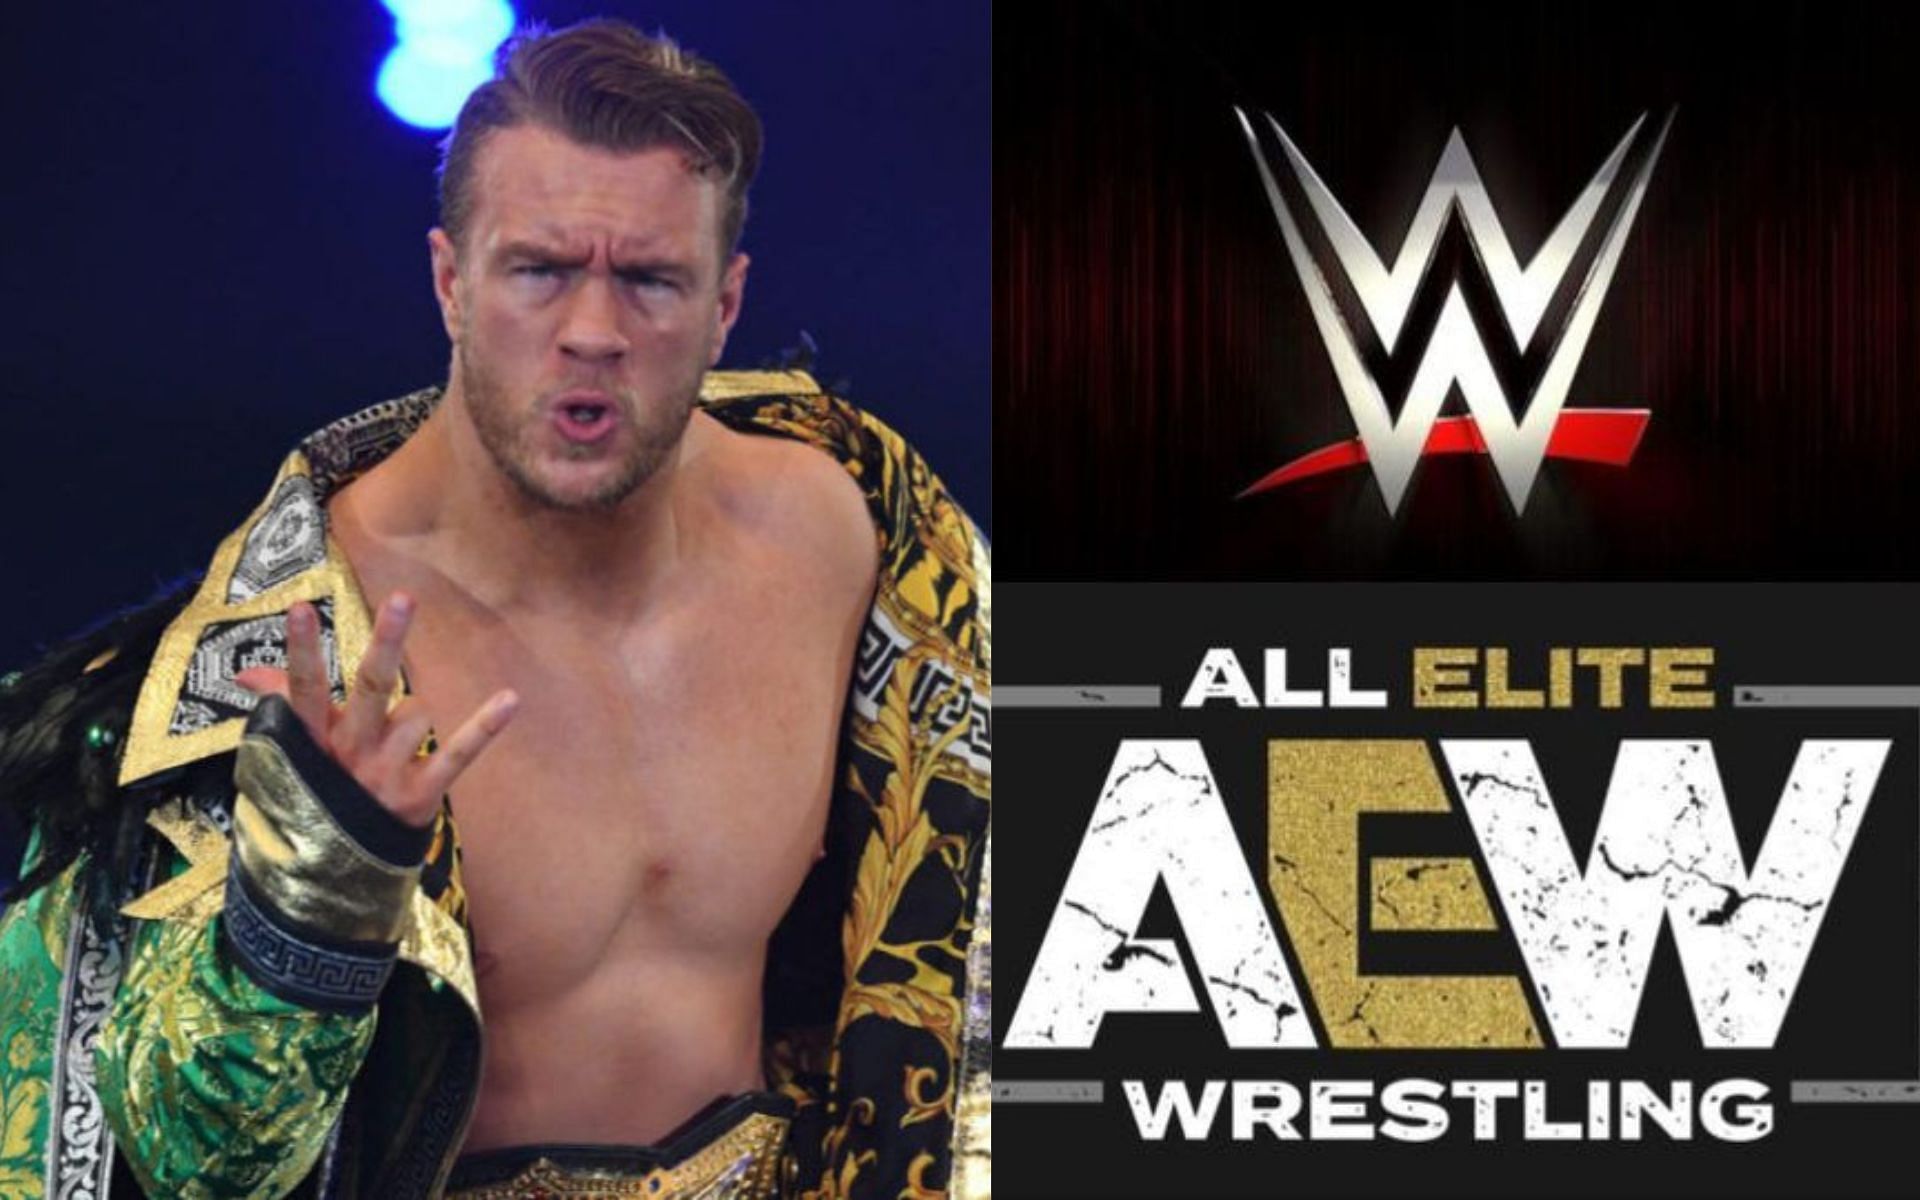 Will Ospreay will make his singles debut on AEW Dynamite Road Rager